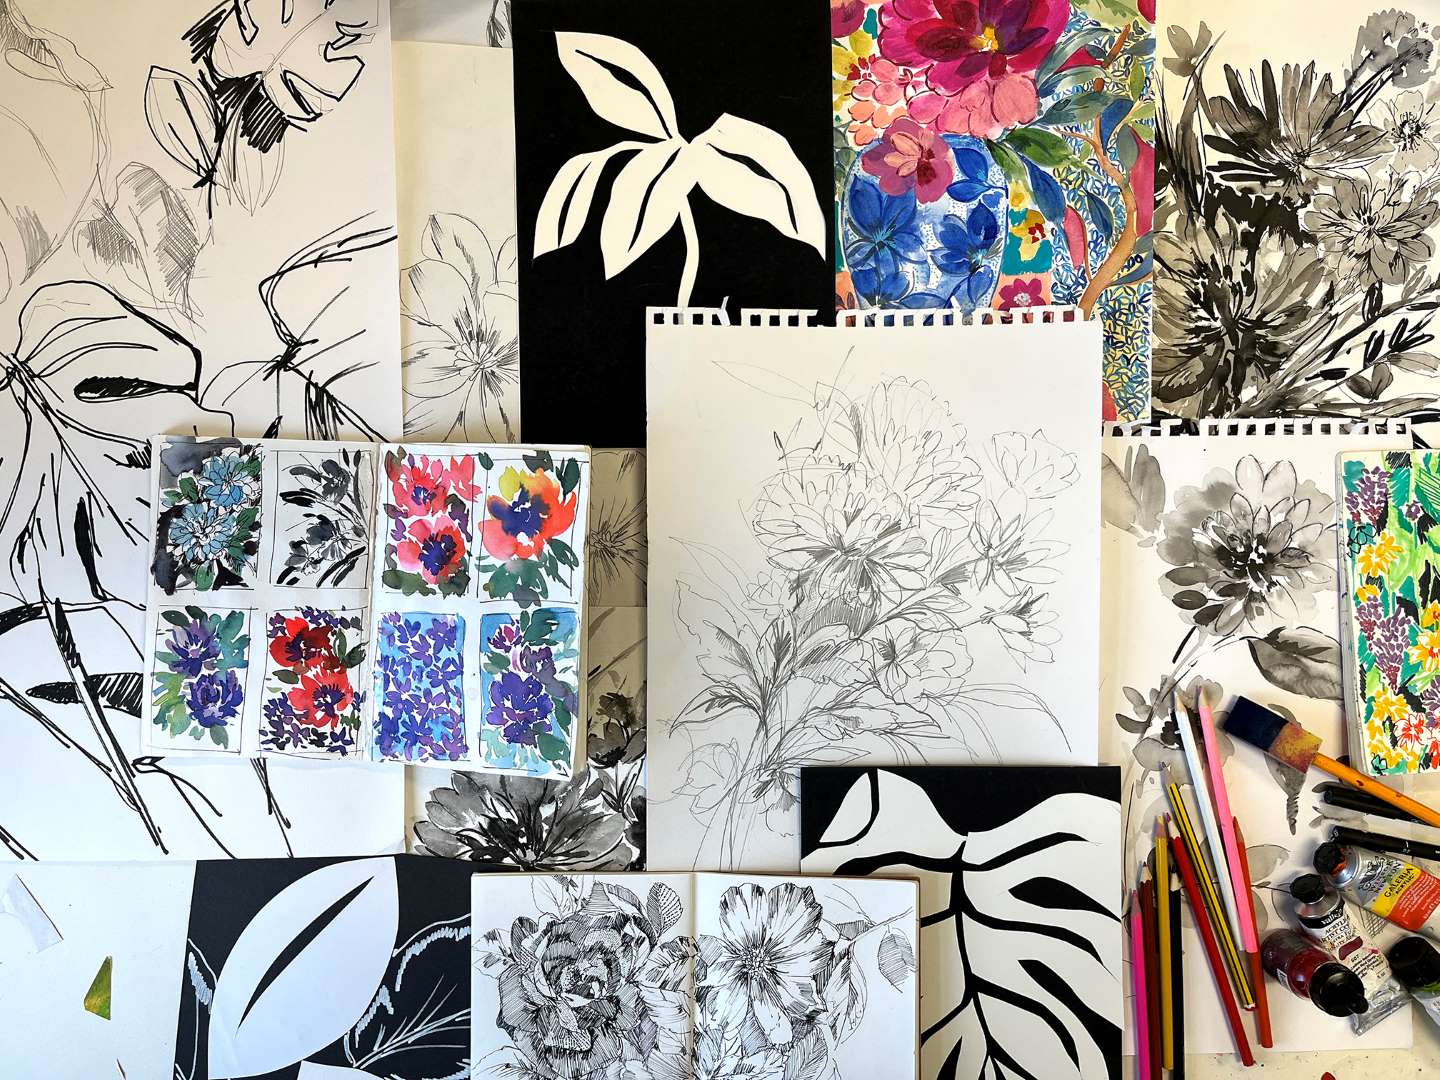 Mood board of different drawings and paintings of flowers